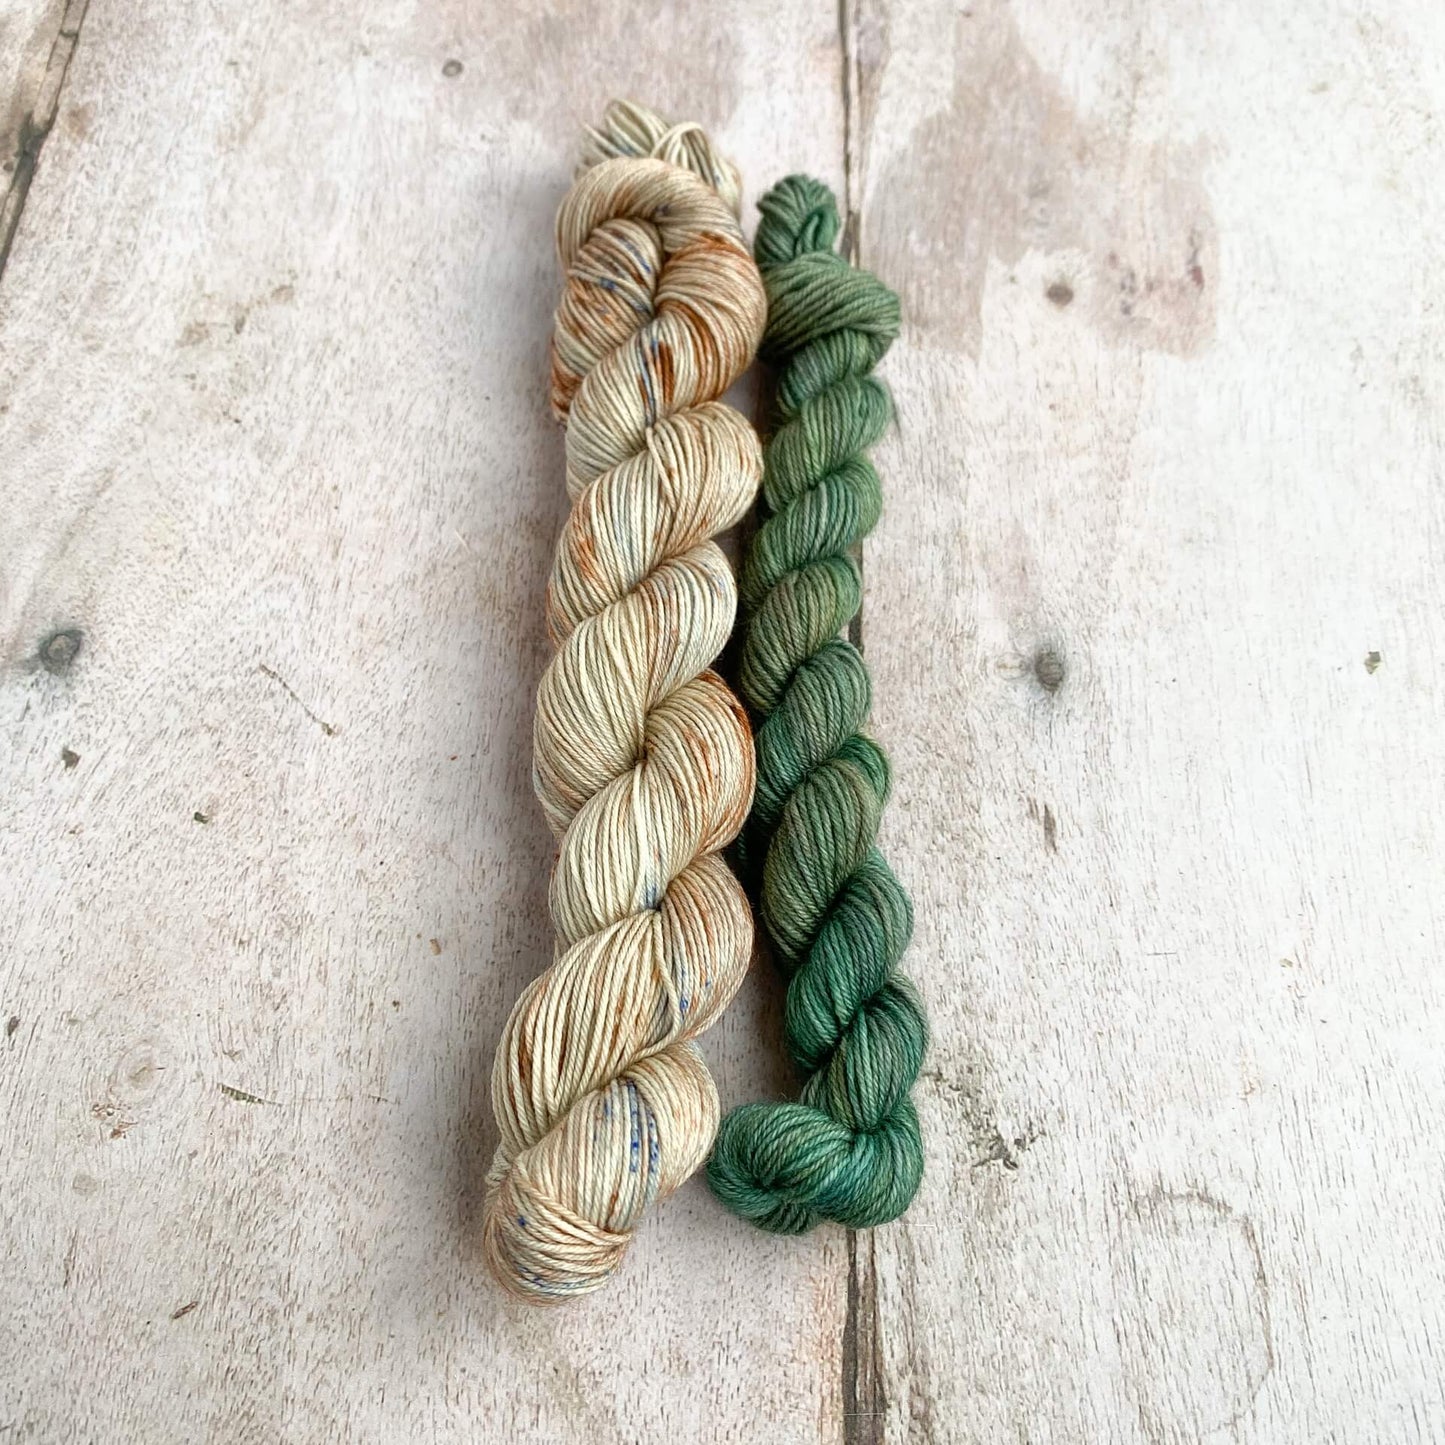 Two skeins of yarn in colours of brown, speckled blue and green sit on a wooden table. 